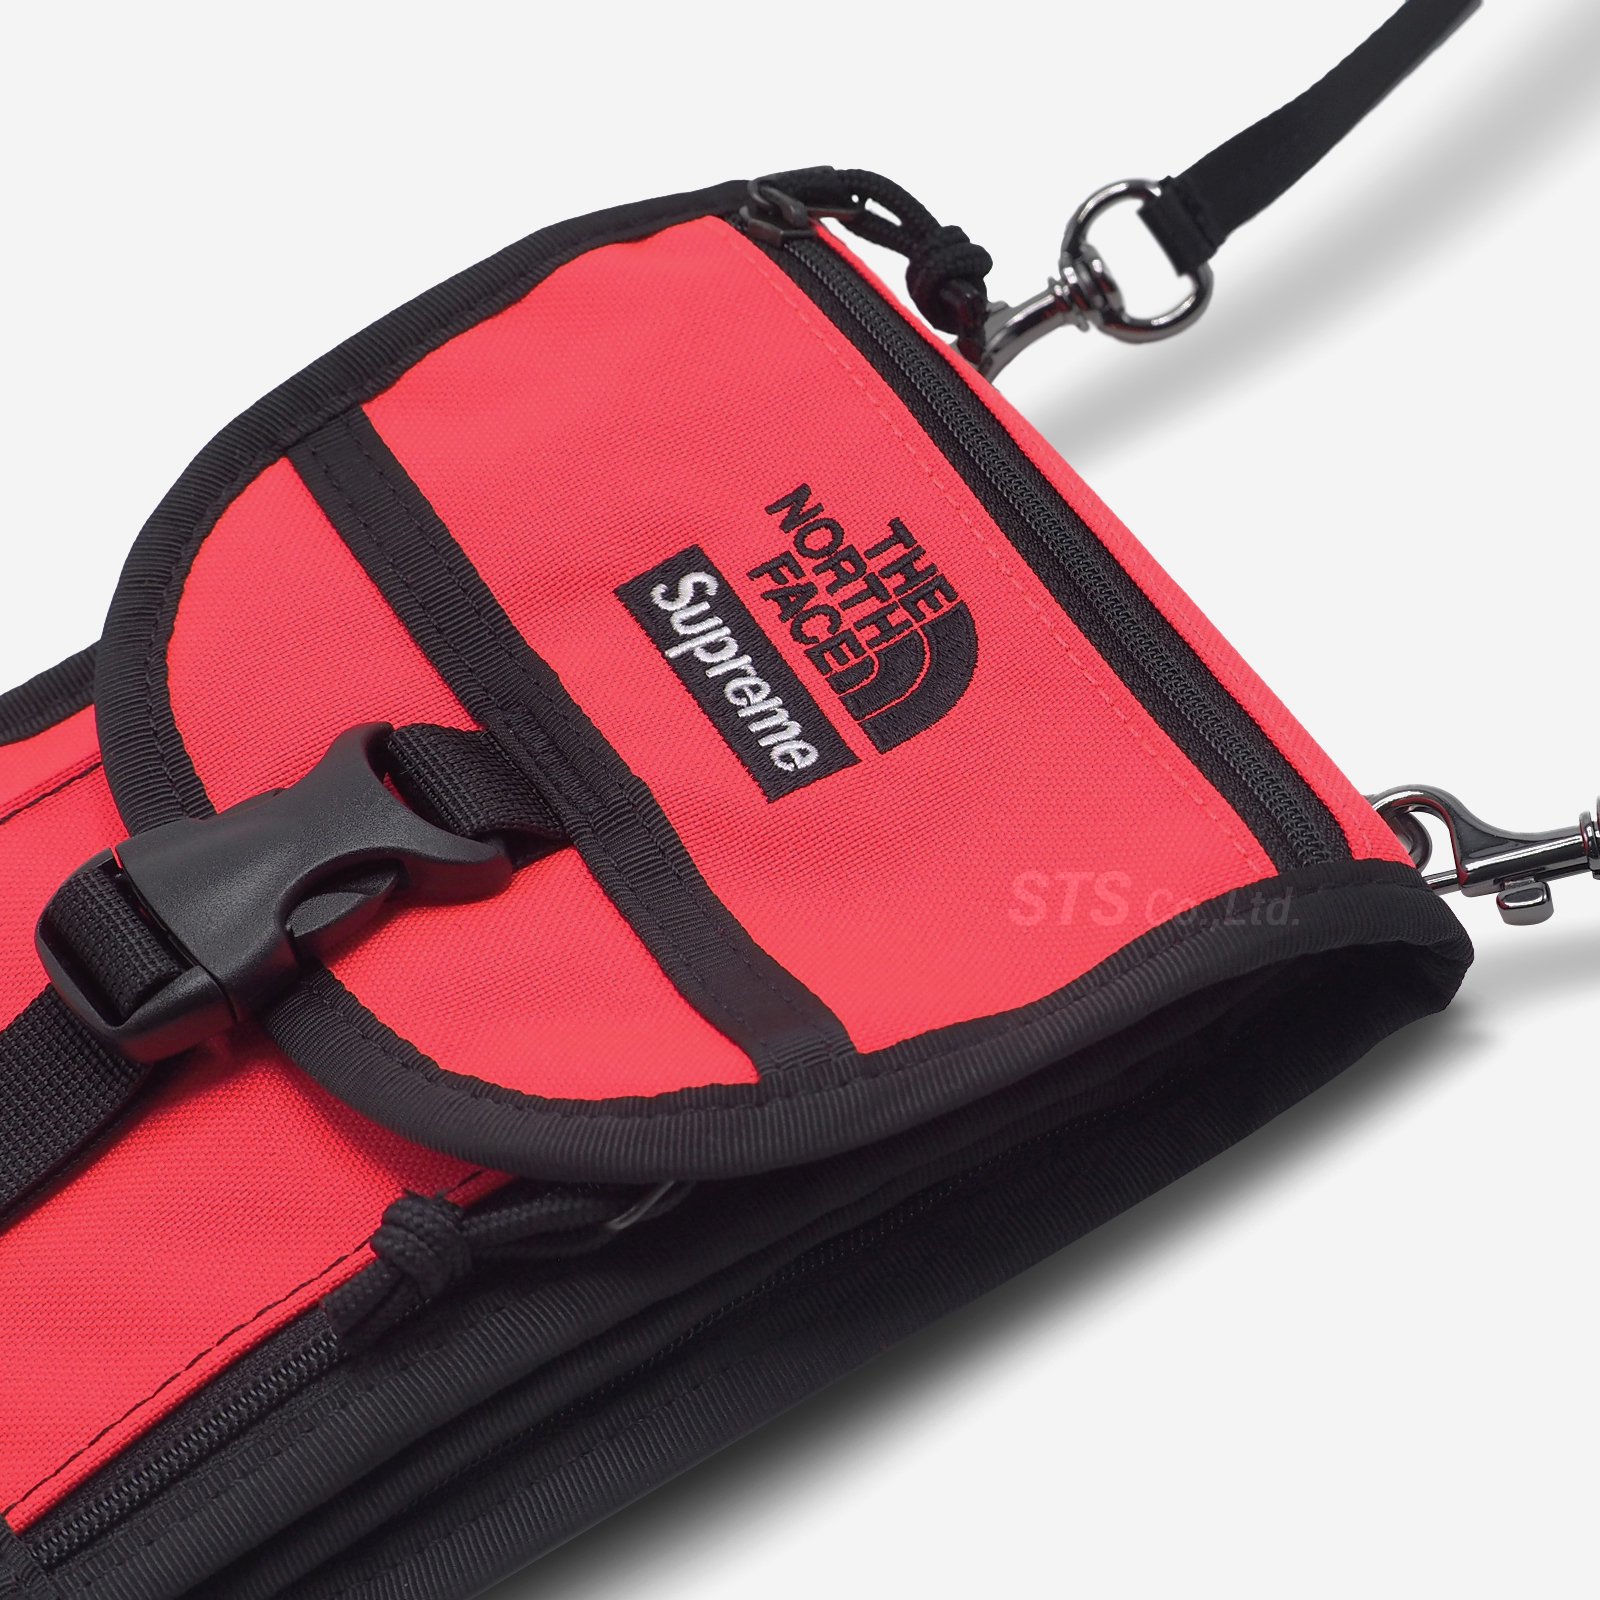 supreme north face RTG Utility Pouch red